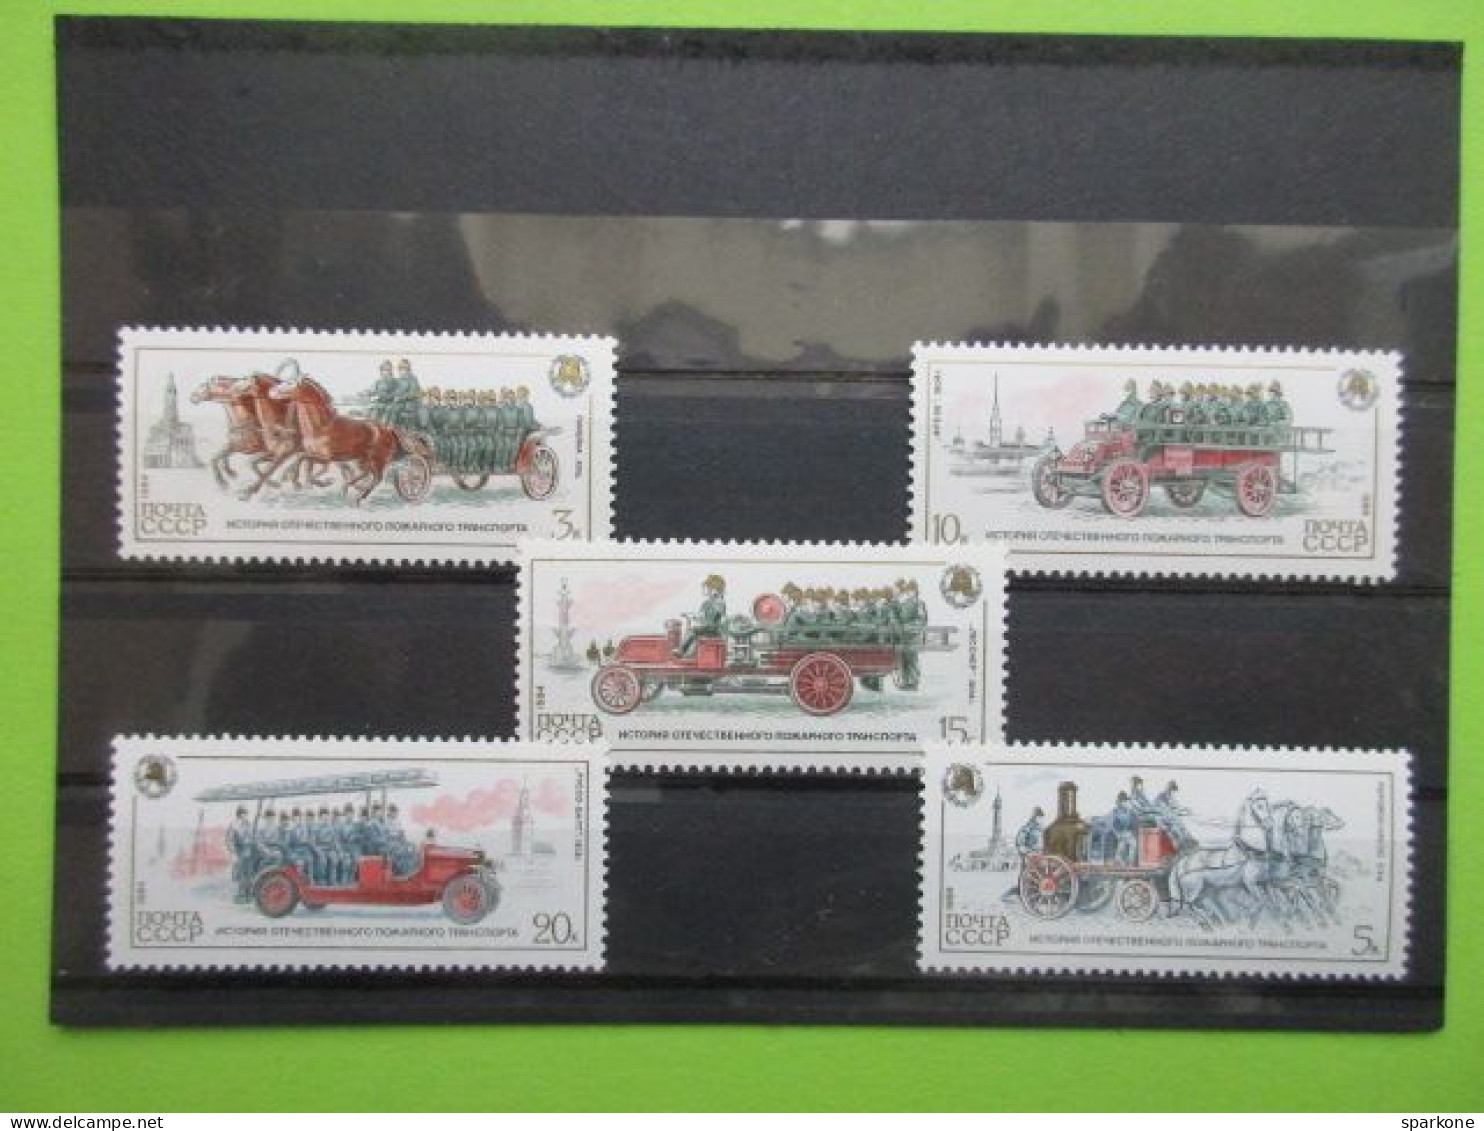 Russie - Lot  5 Timbres Neuf - Véhicule De Pompier - 1984 - Unused Stamps